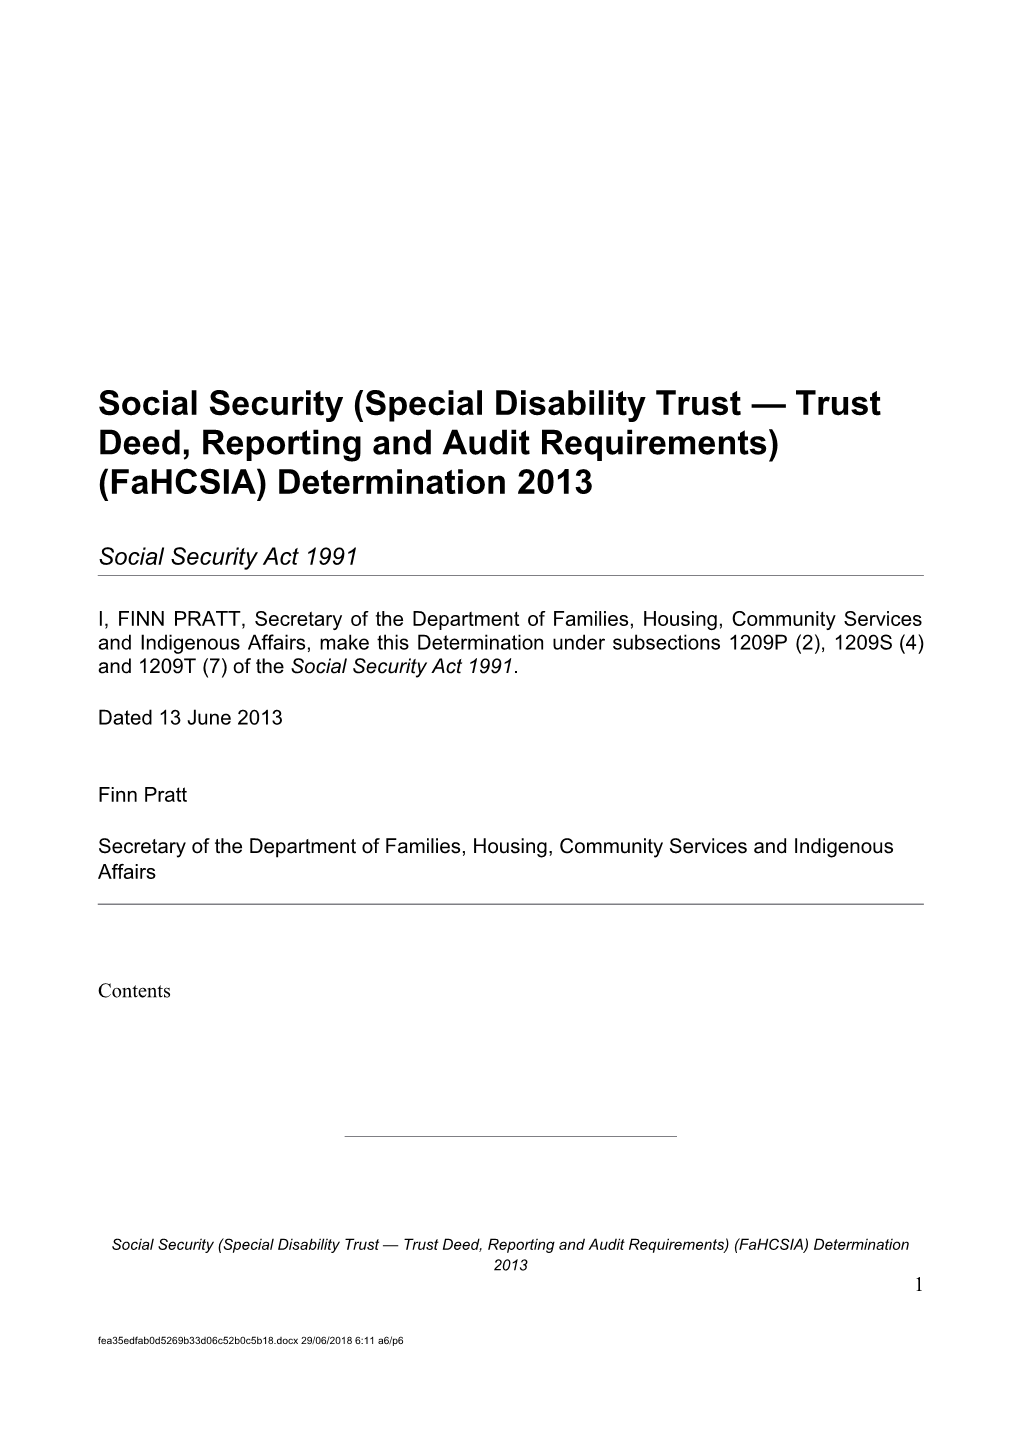 Social Security (Special Disability Trust - Deed, Reporting and Audit Requirements)